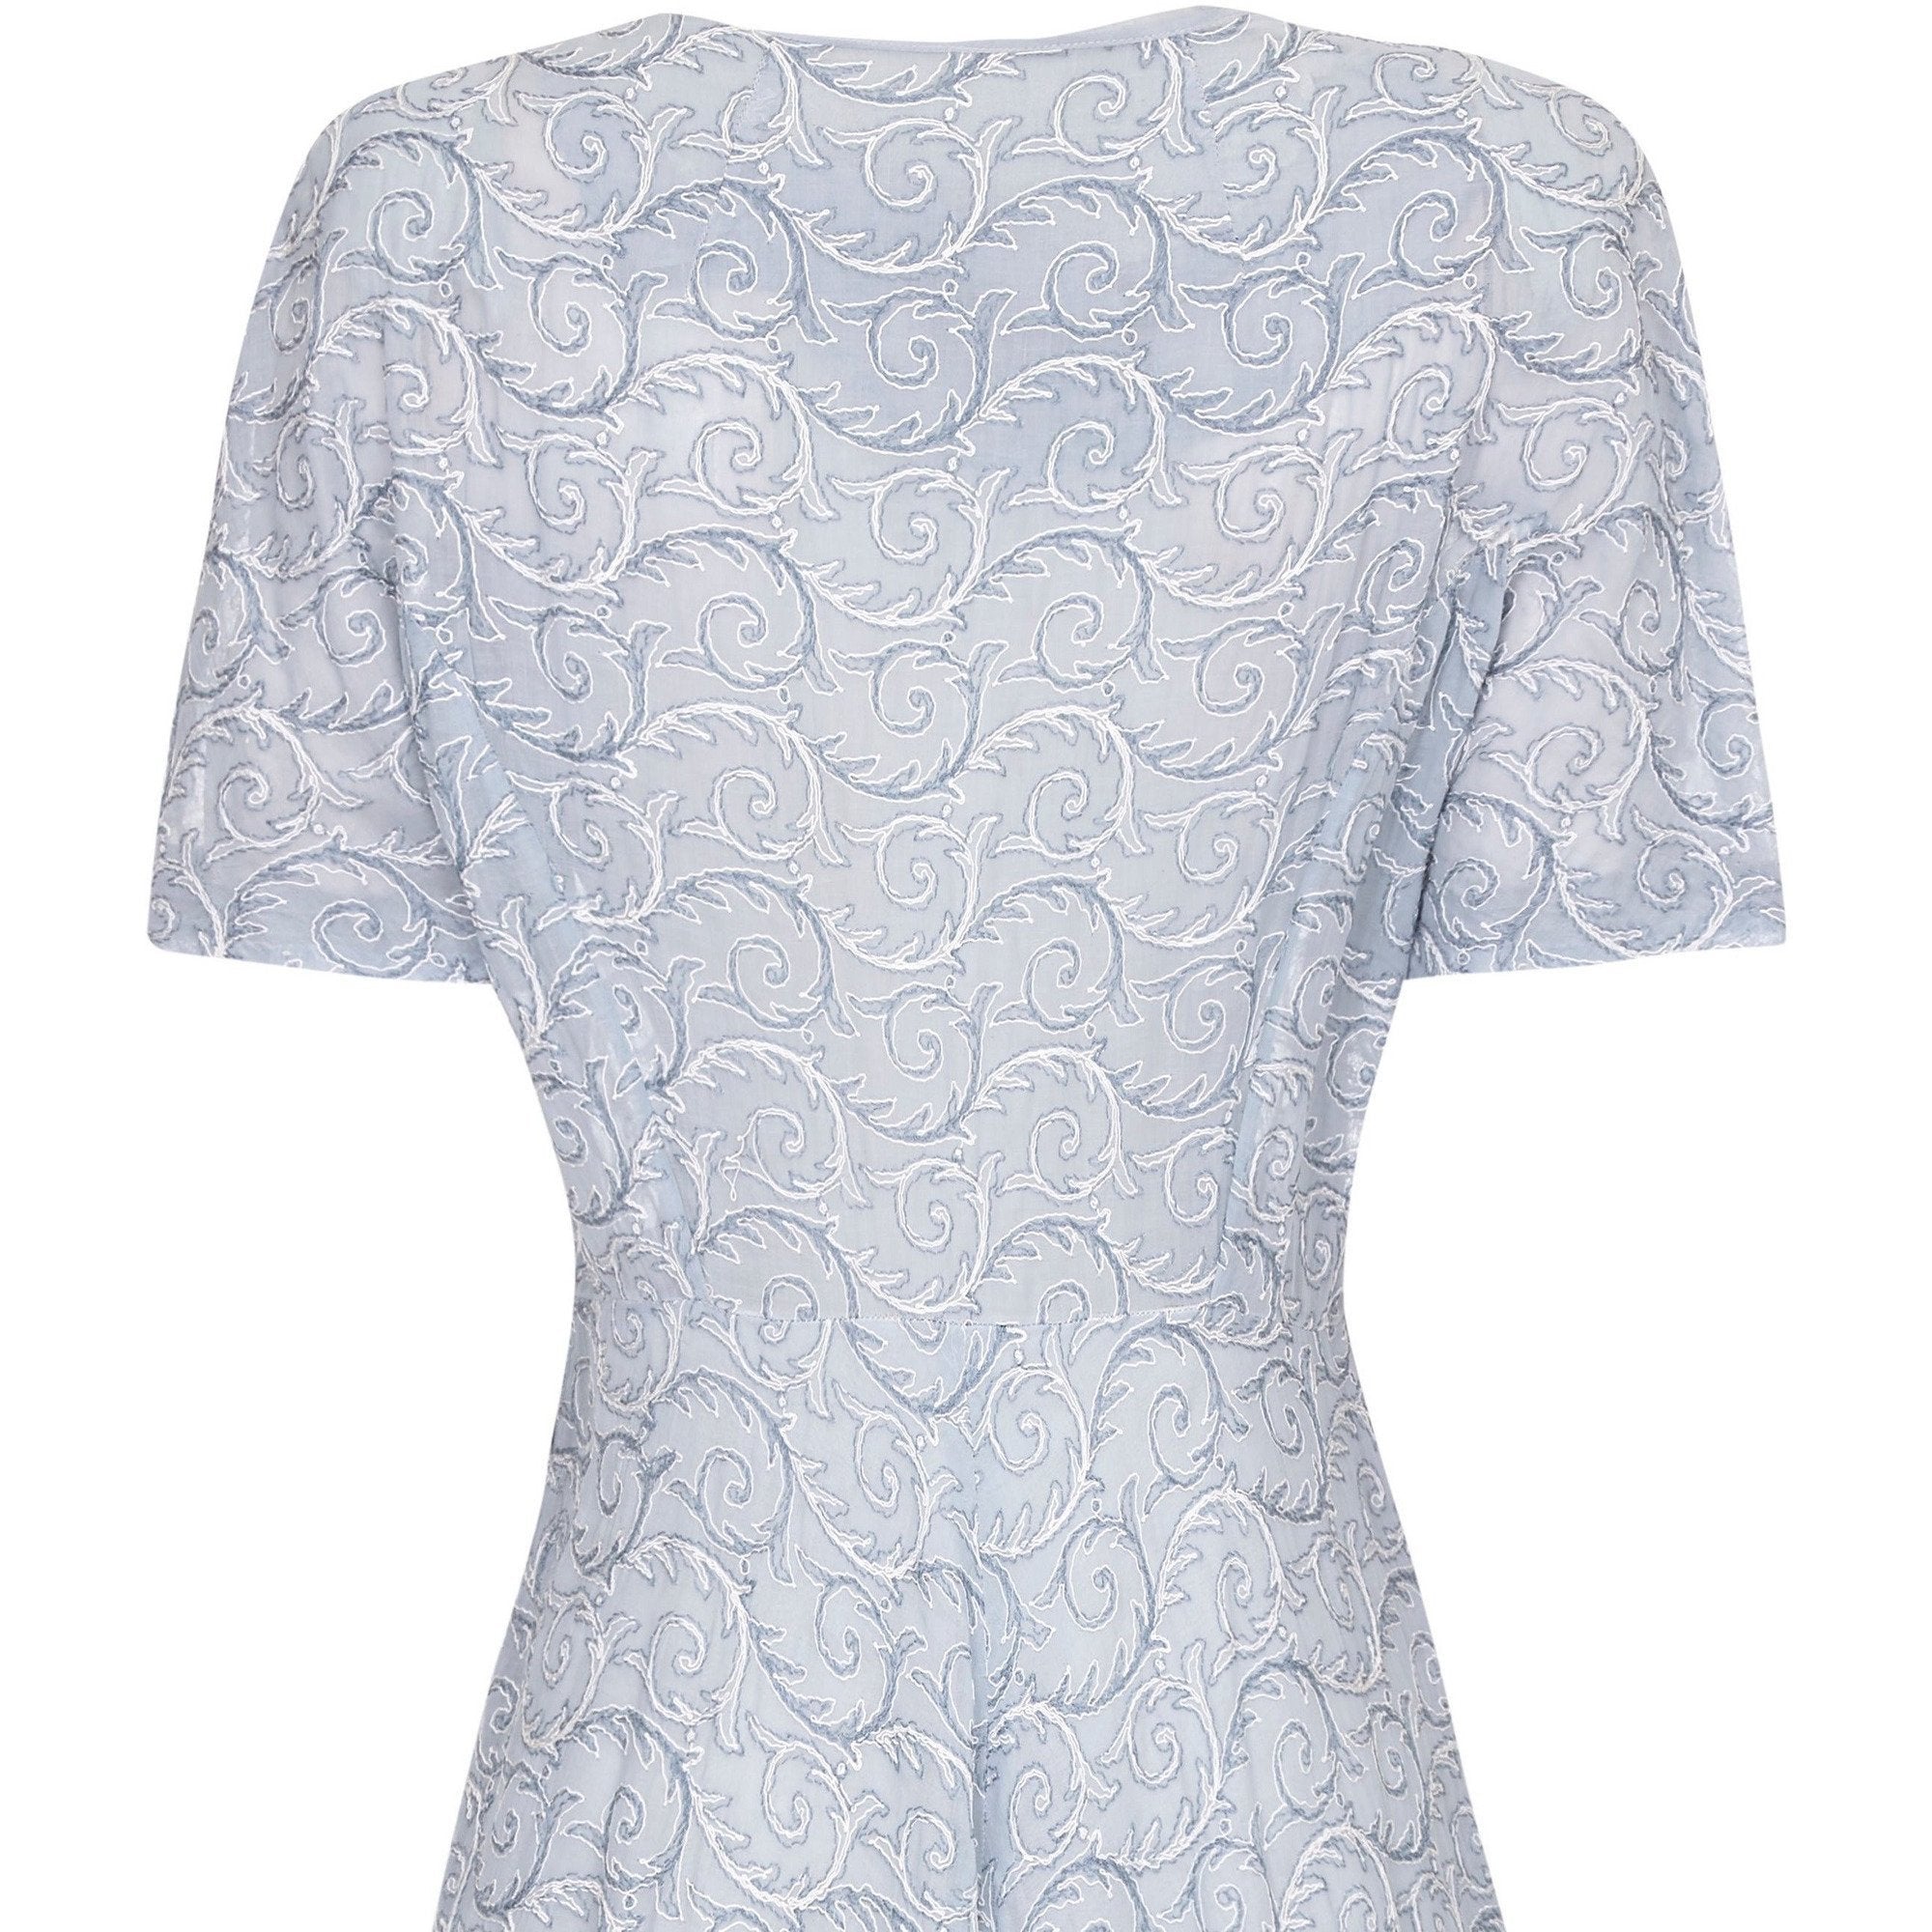 1950s Pale Blue Embroidered Cotton Dress